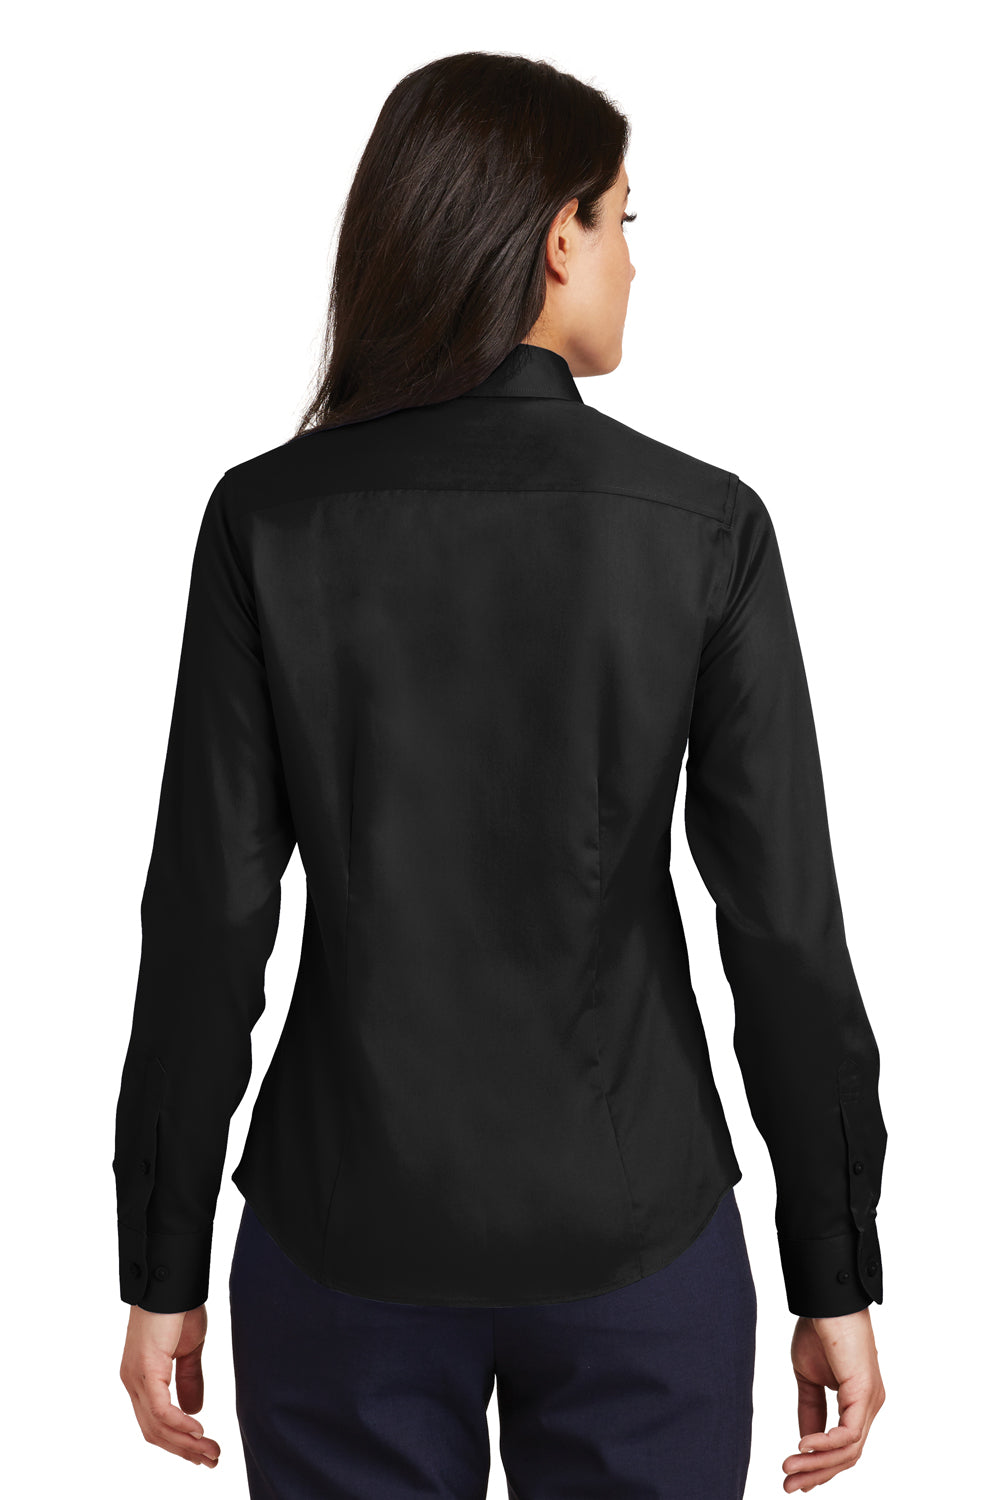 Port Authority L638 Womens Wrinkle Resistant Long Sleeve Button Down Shirt Black Back